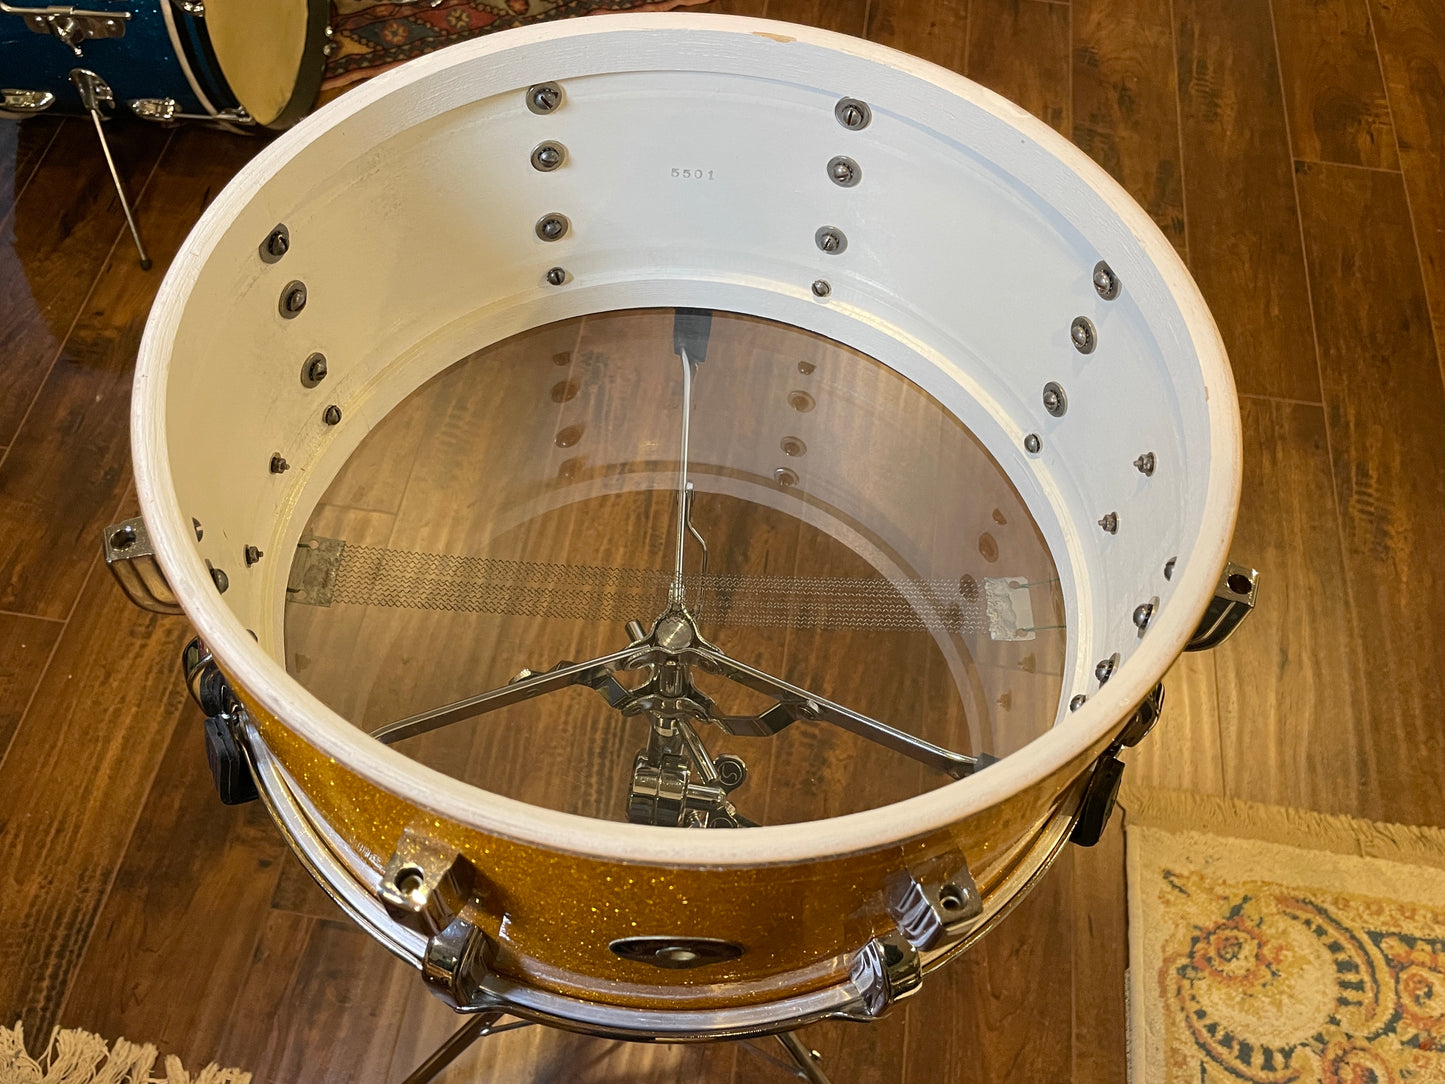 1955 Leedy & Ludwig 6.5x14 No. 400 Broadway Snare Drum "Sparkling Gold" Sparkle